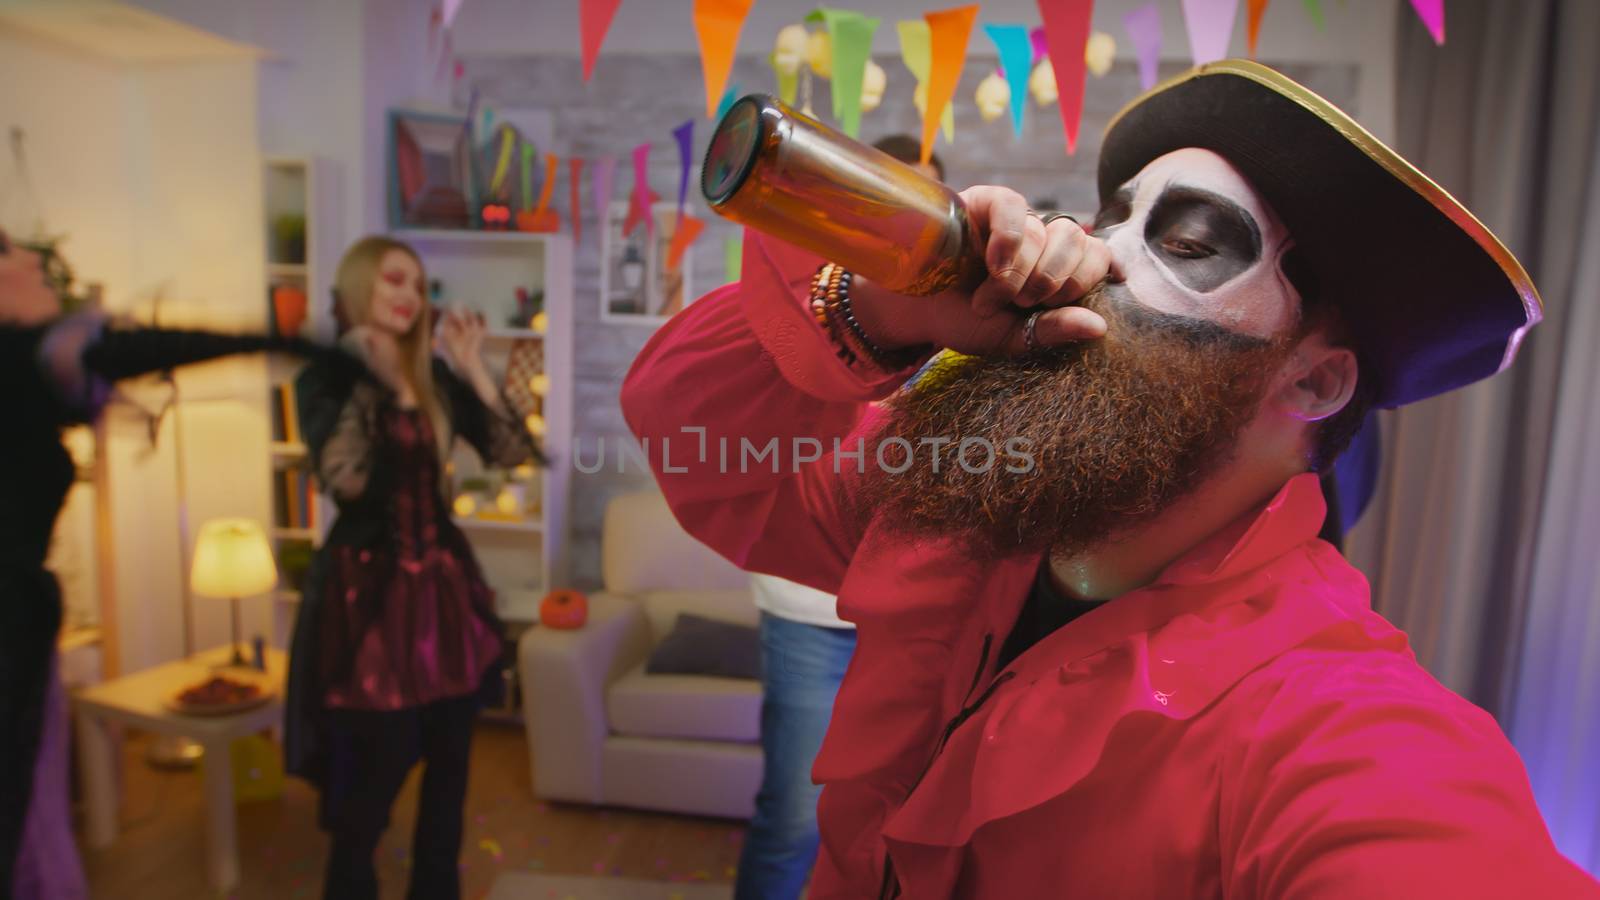 Pov of bearded pirate celebrating halloween with his friends inviting everybody to the party while other scary characters are dancing in the background in decorated house